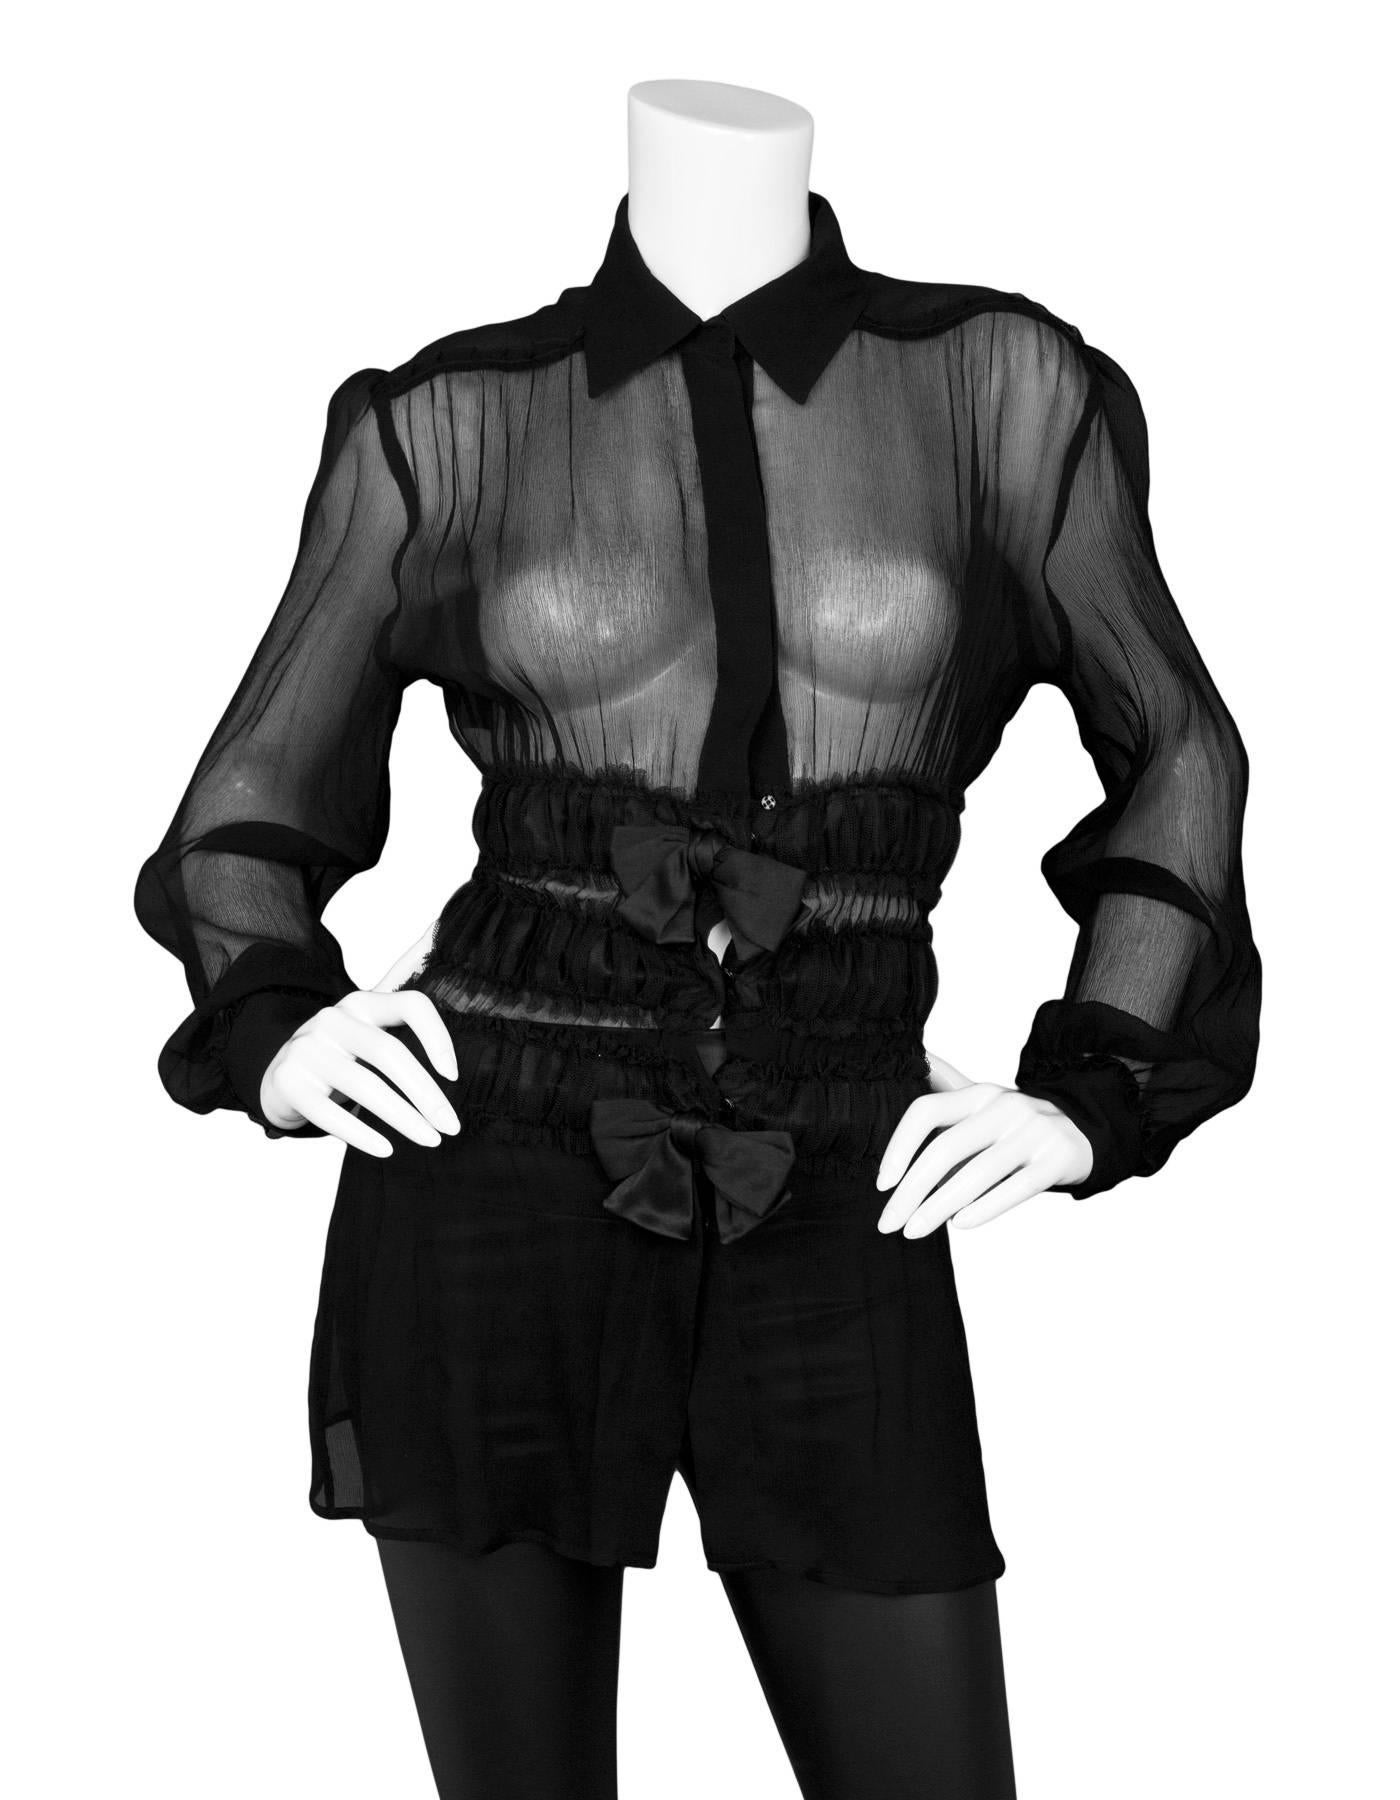 Jean Paul Gaultier Black Silk Long Sleeve Ruffle Top 
Features cinching at waist

Made In: Italy
Color: Black
Composition: 100% silk
Lining: None
Closure/Opening: Snap button front
Exterior Pockets: None
Interior Pockets: None
Overall Condition: